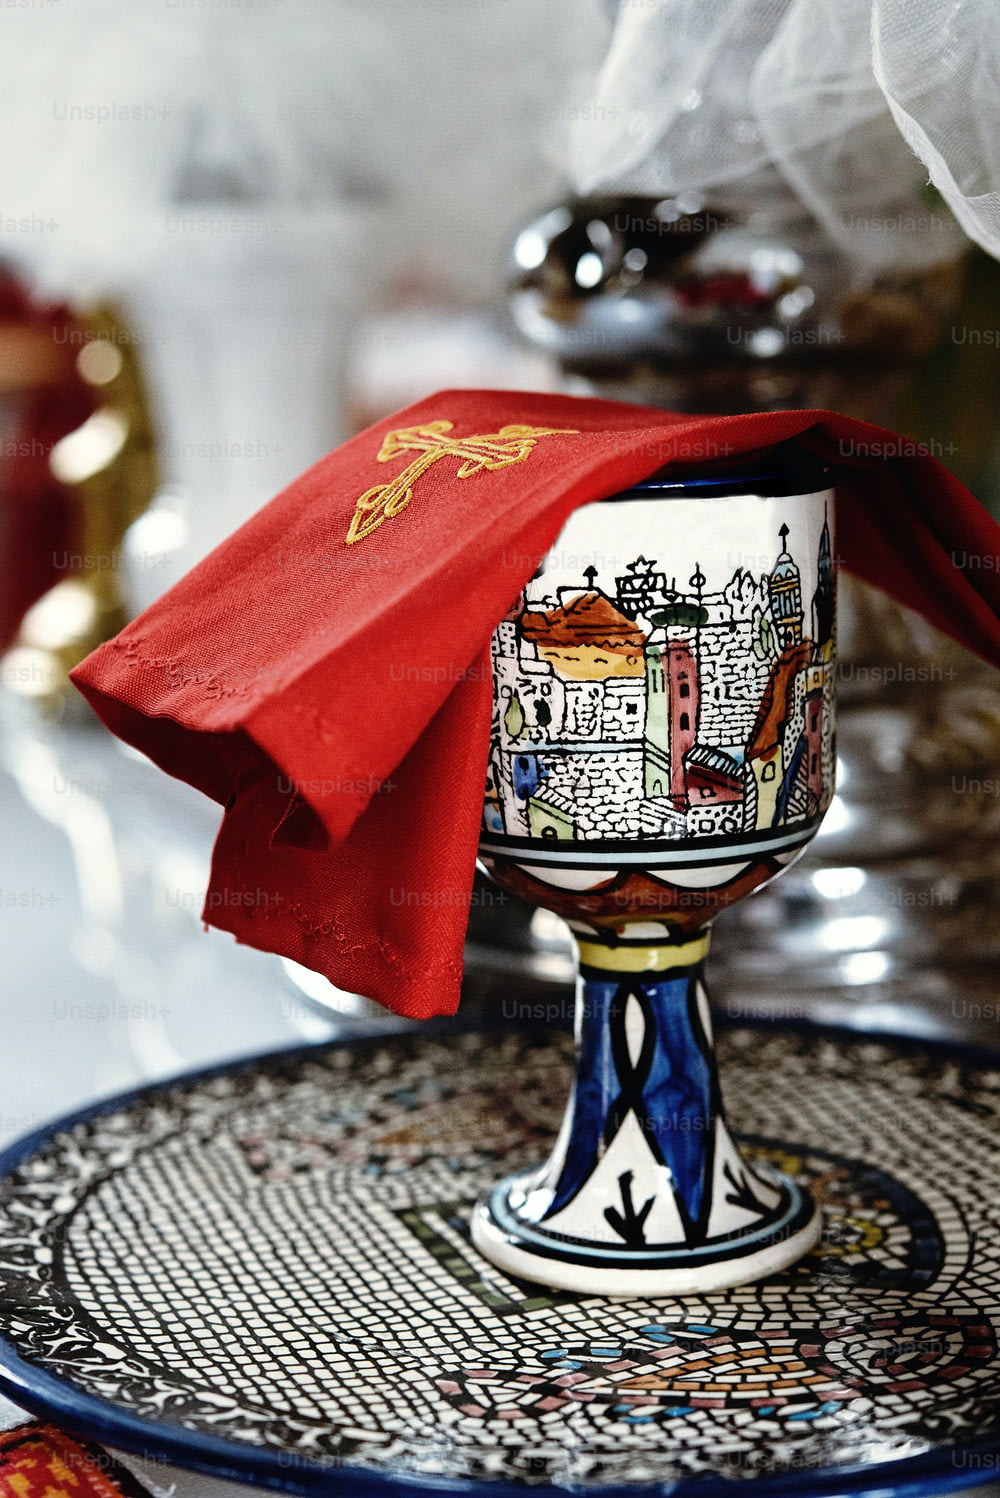 cup in catholic church or cathedral, religion concept, wedding traditional ceremony